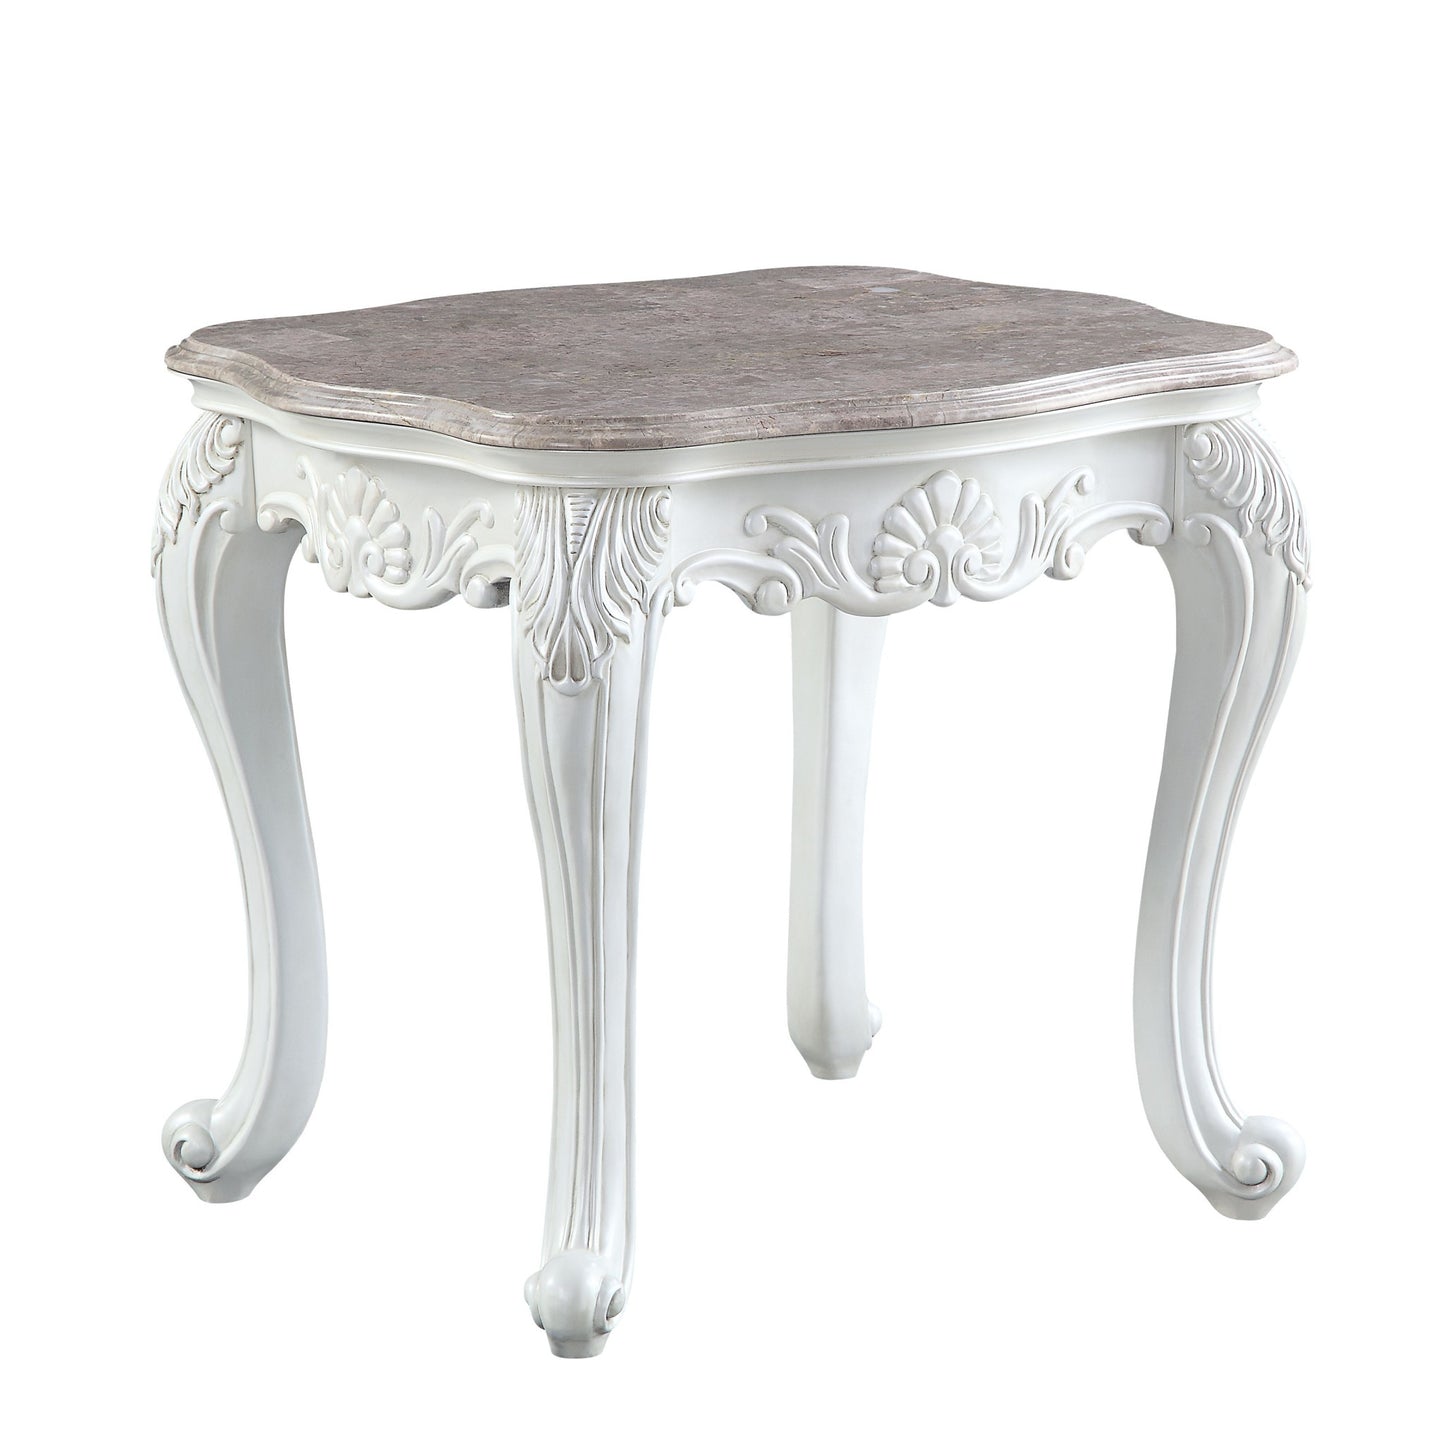 24" White And Marble Marble And Polyresin Rectangular End Table By Homeroots